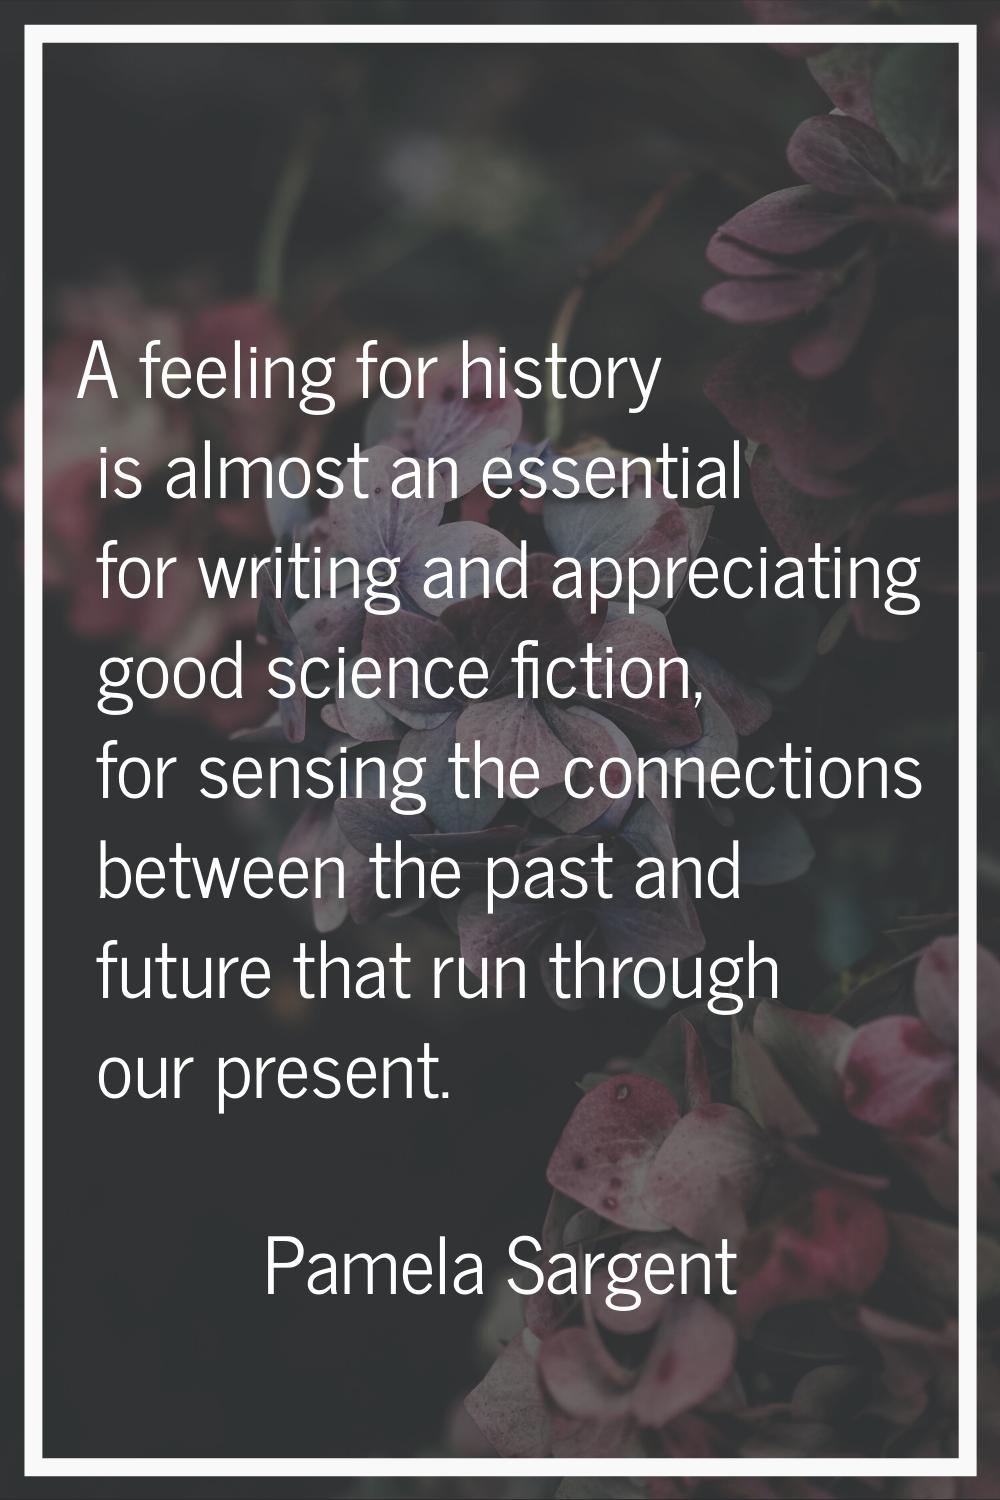 A feeling for history is almost an essential for writing and appreciating good science fiction, for